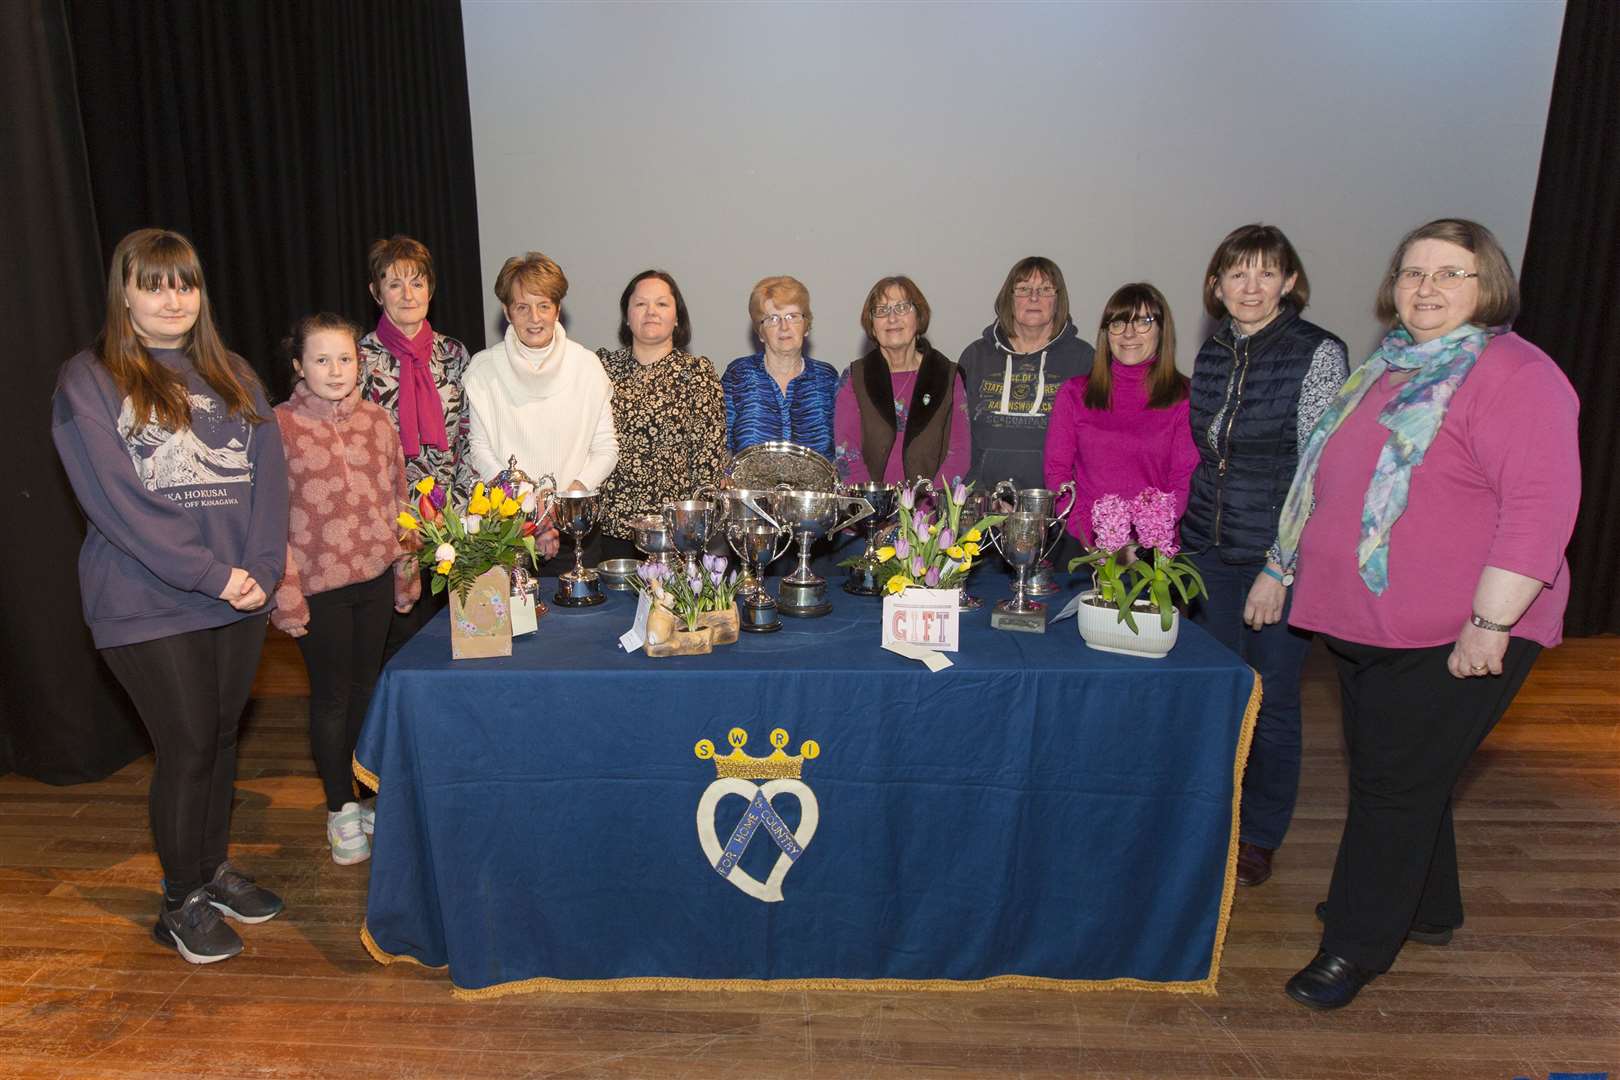 Trophy winners from the East of Caithness SWI bulb show along with Lysette Butler (right), the Caithness SWI Federation chairwoman, who handed over the trophies following the annual event in the Wick Assembly Rooms. From left: Aimee Lowe, Keiss, who shared the junior trophy for most points in bulbs with Lily Richard, Killimster, who wasn't present, Ella Miller, Thrumster, junior most points in handicrafts and baking, Anne Sutherland, Latheron, who won the trophies for crocuses and two hyacinths, Gladys Gunn, Mid Clyth, best exhibit in bulbs, four daffodils, and best amaryllis, Lynn Hendry, Latheron, most points senior handicrafts, Kathleen Baikie, Thrumster, four tulips, Sue Steven, Berriedale, three hyacinths, Shona Sinclair, who collected the trophy for the institute with 16-24 members on behalf of Latheron, Julie Murray, who collected the trophy for the institute with 15 or less members on behalf of Killimster and Carol Grant, Latheron who had most points in bulbs and most points overall. Picture: Robert MacDonald/Northern Studios